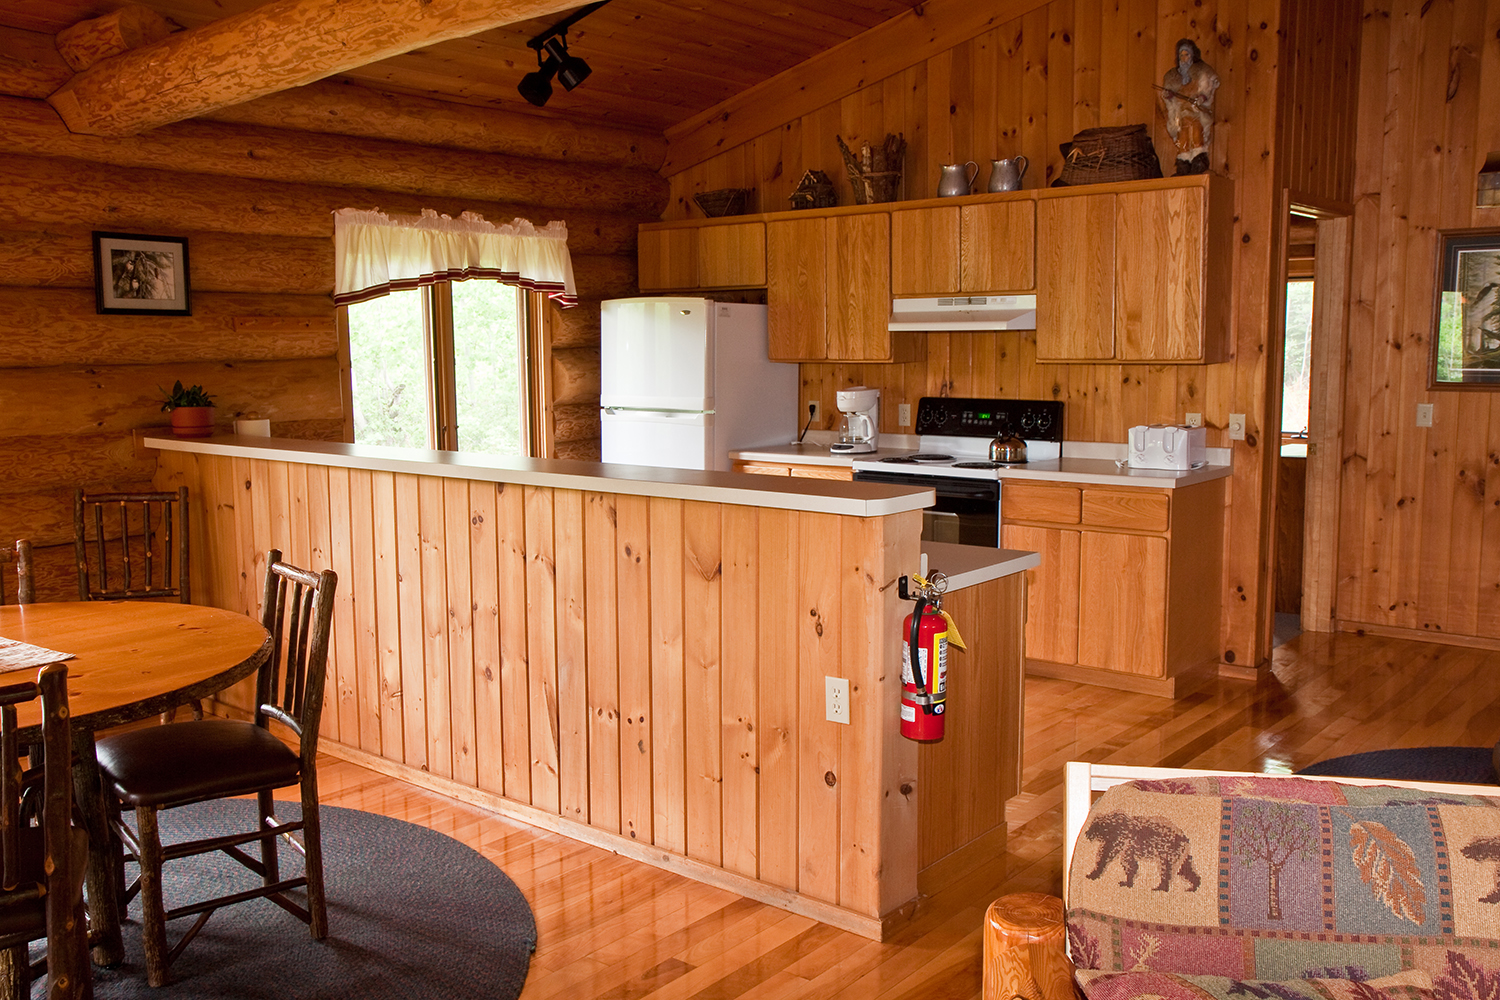 Kitchen area of log cabin with wooden cabinets and white fridge